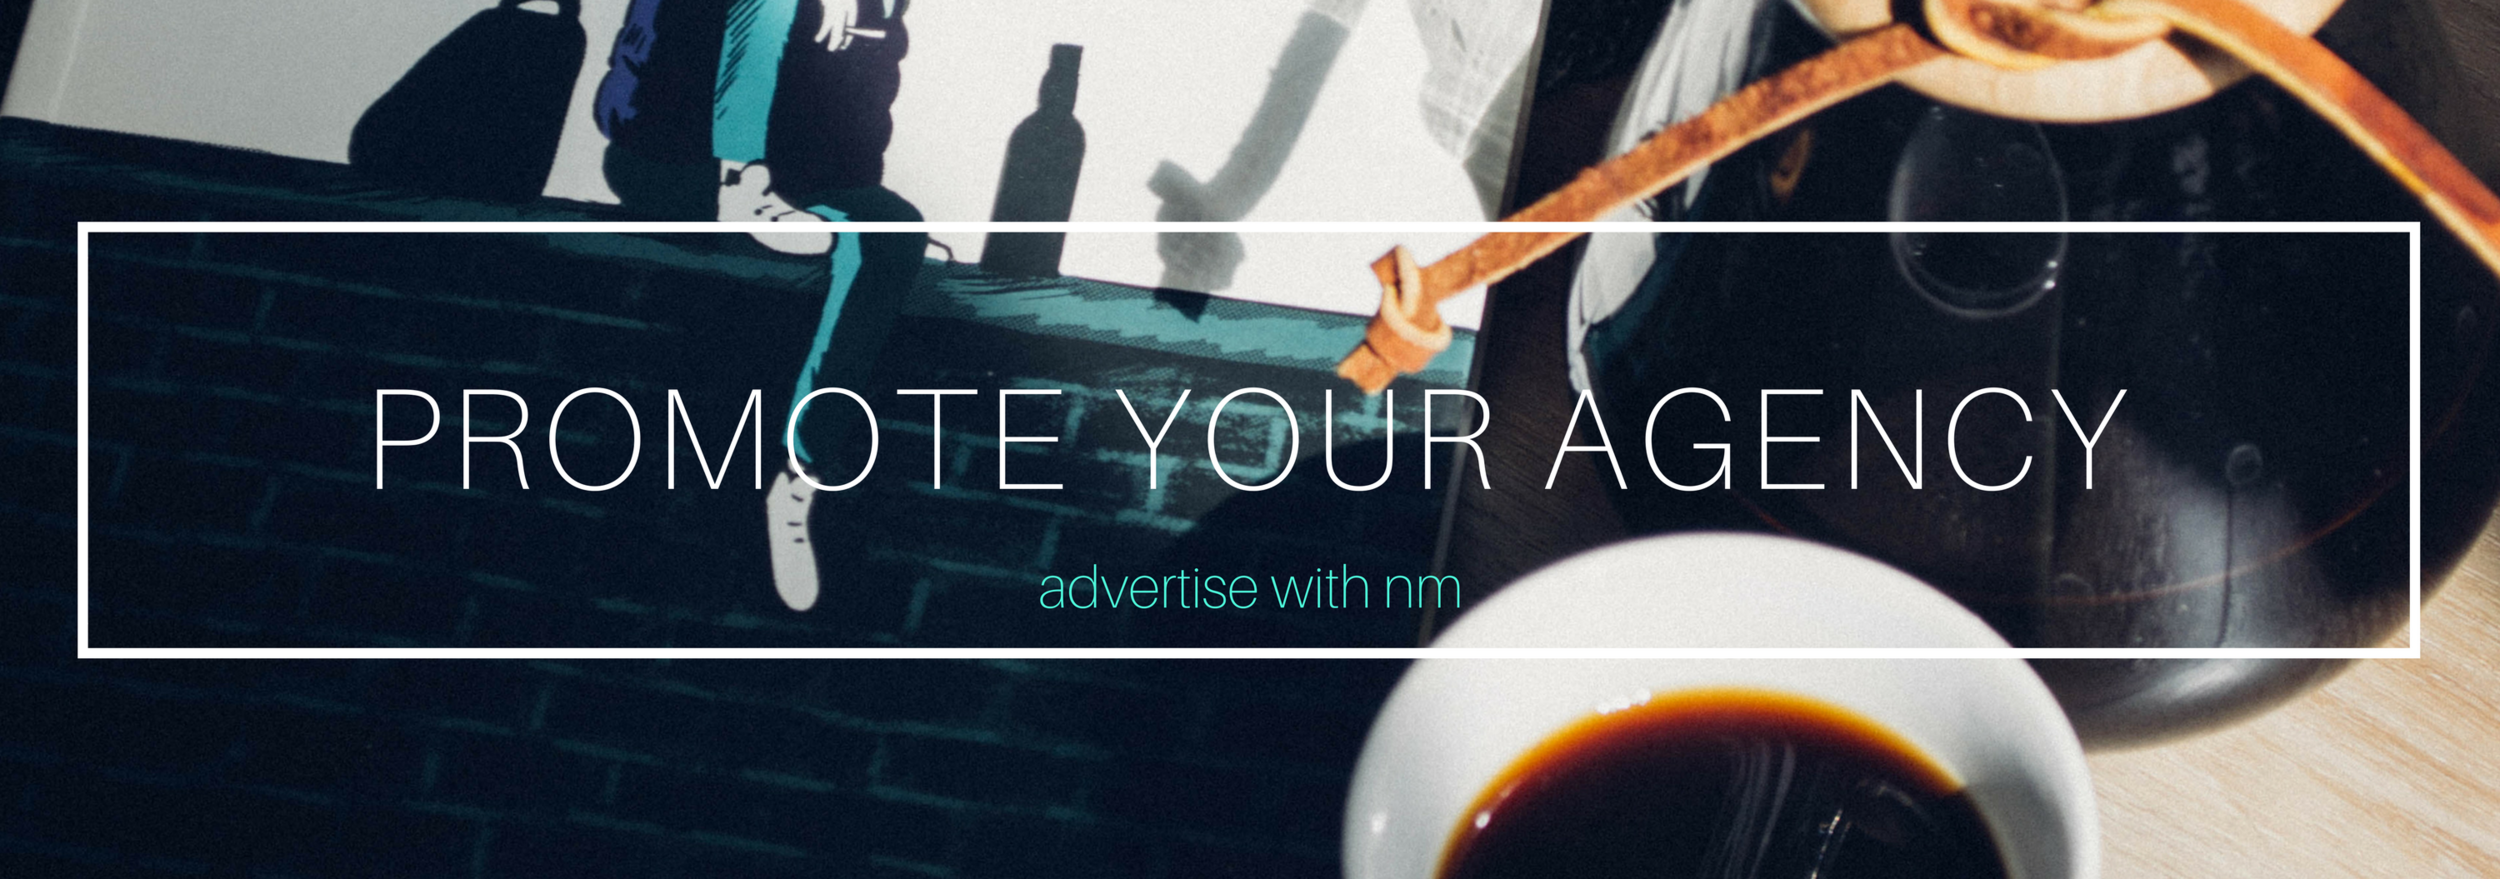 agency banner 1.png